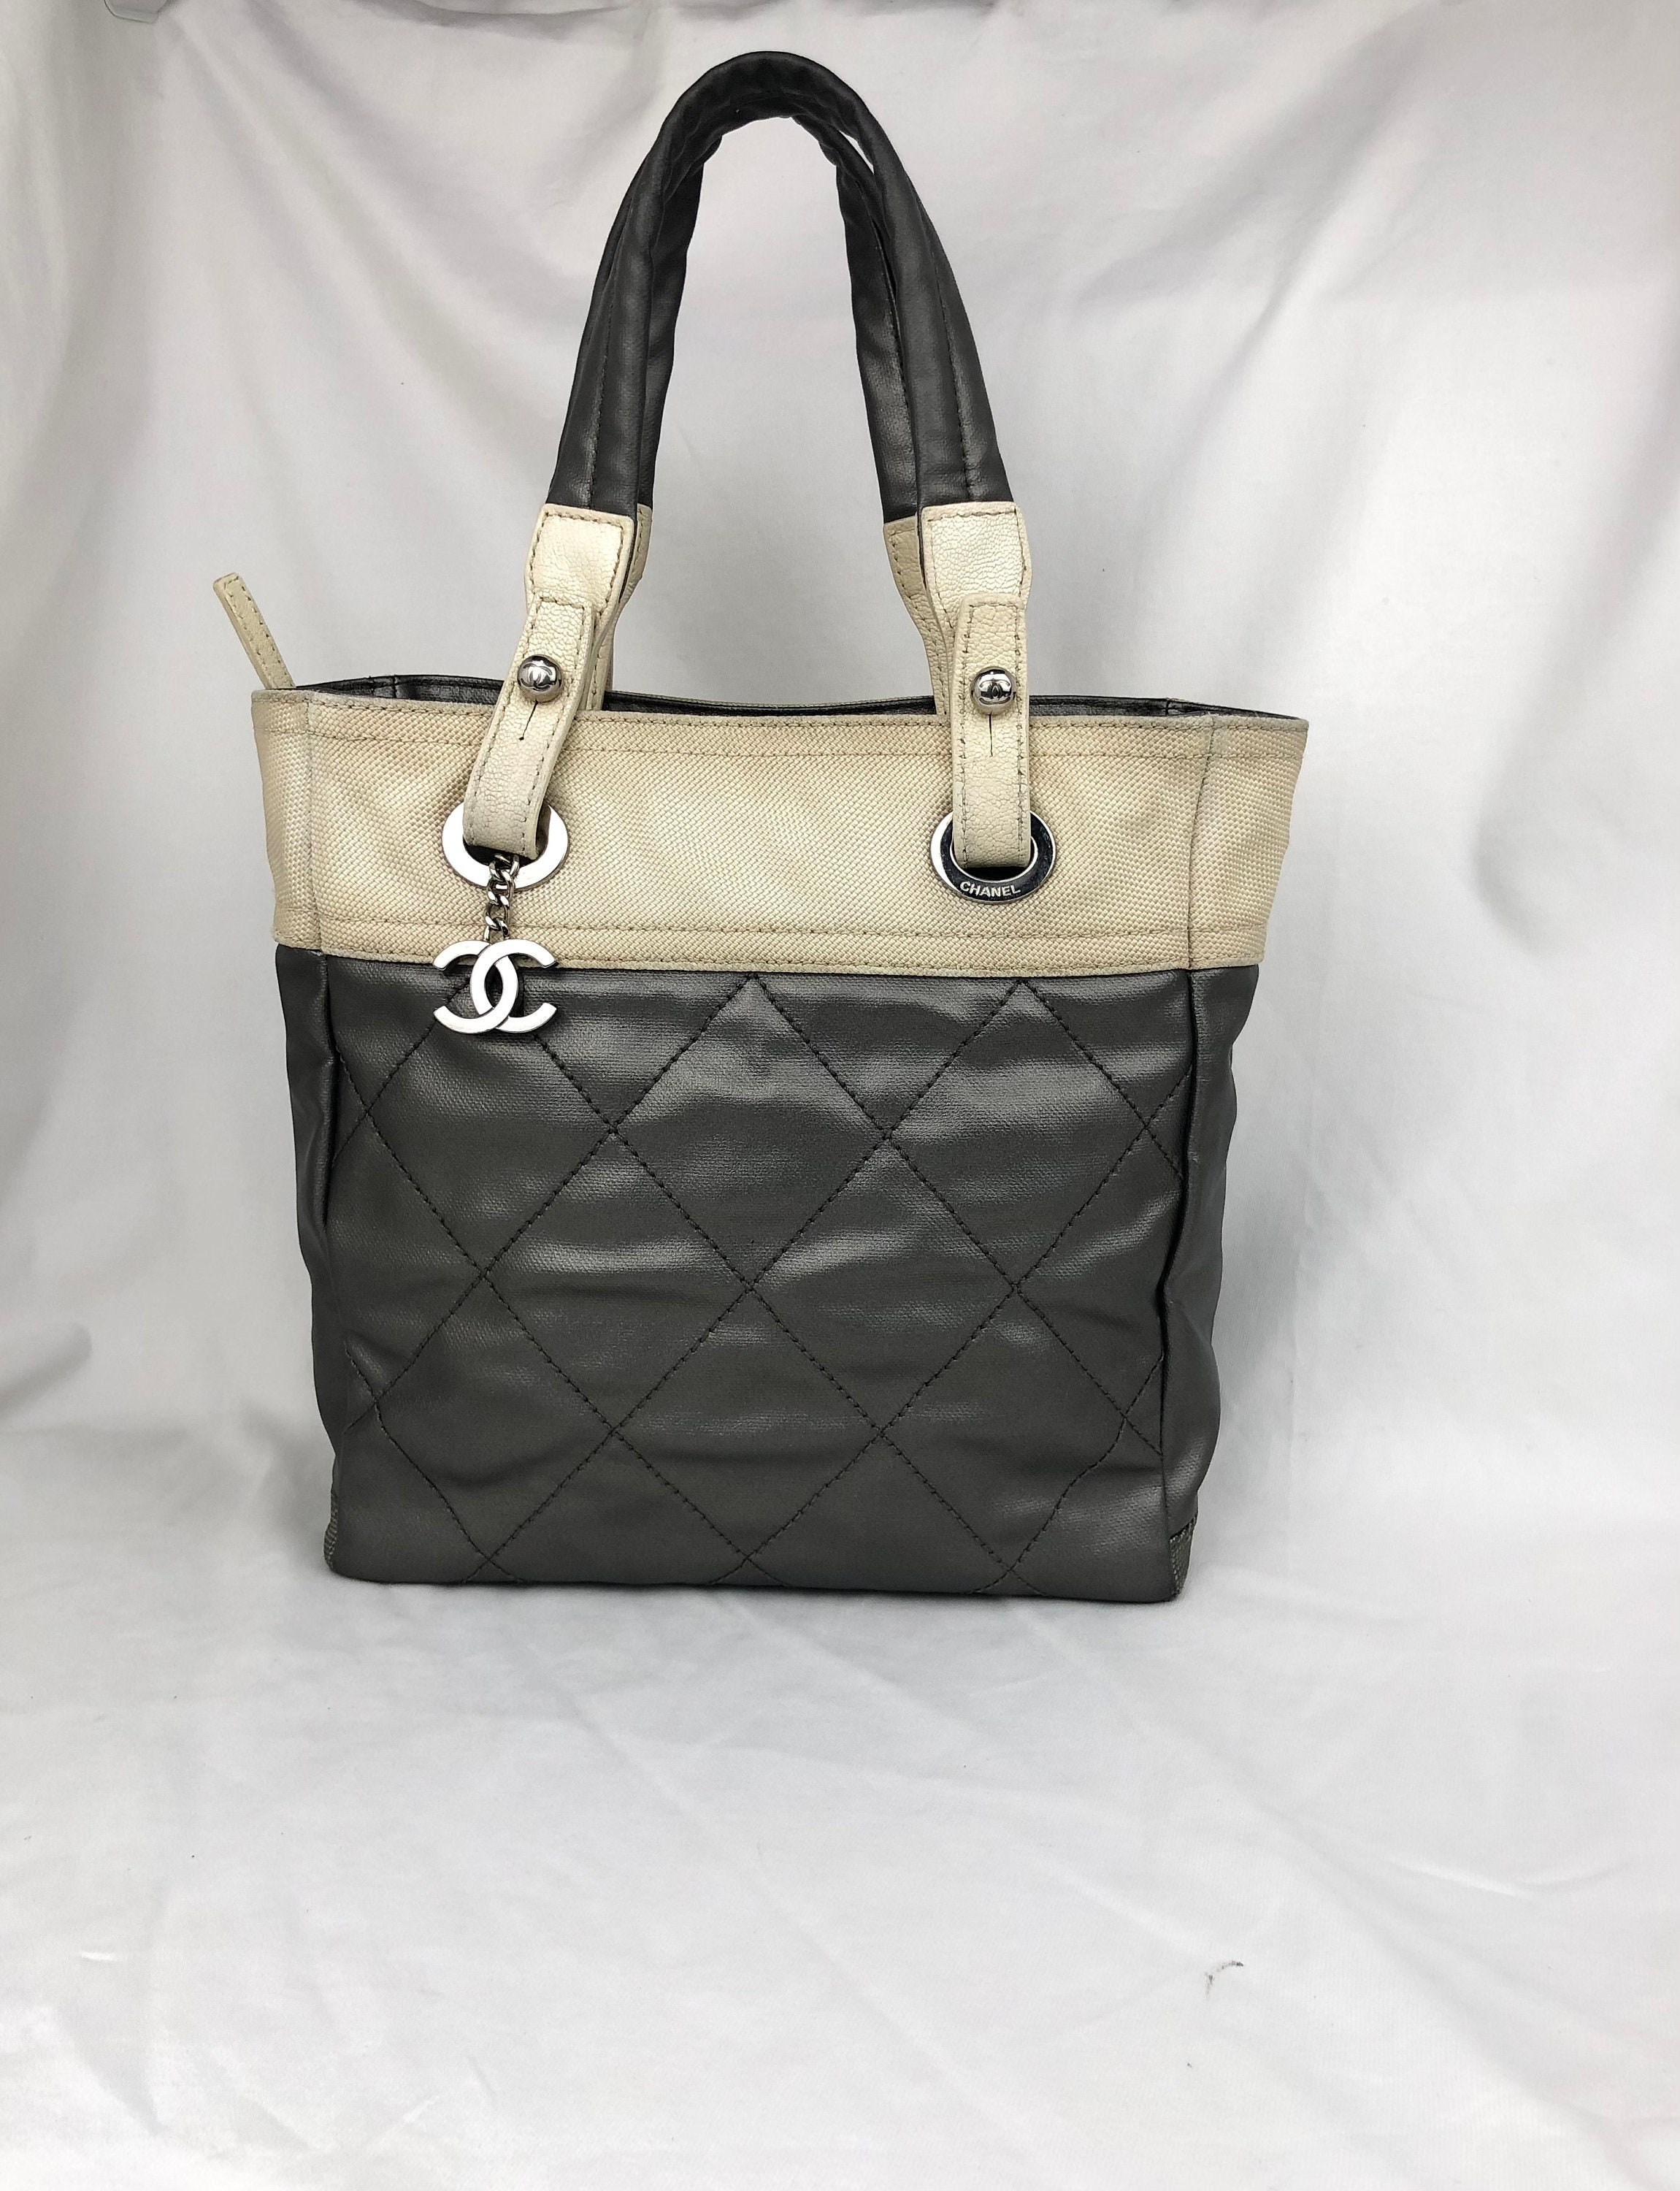 Buy Chanel Canvas Tote Online In India -  India